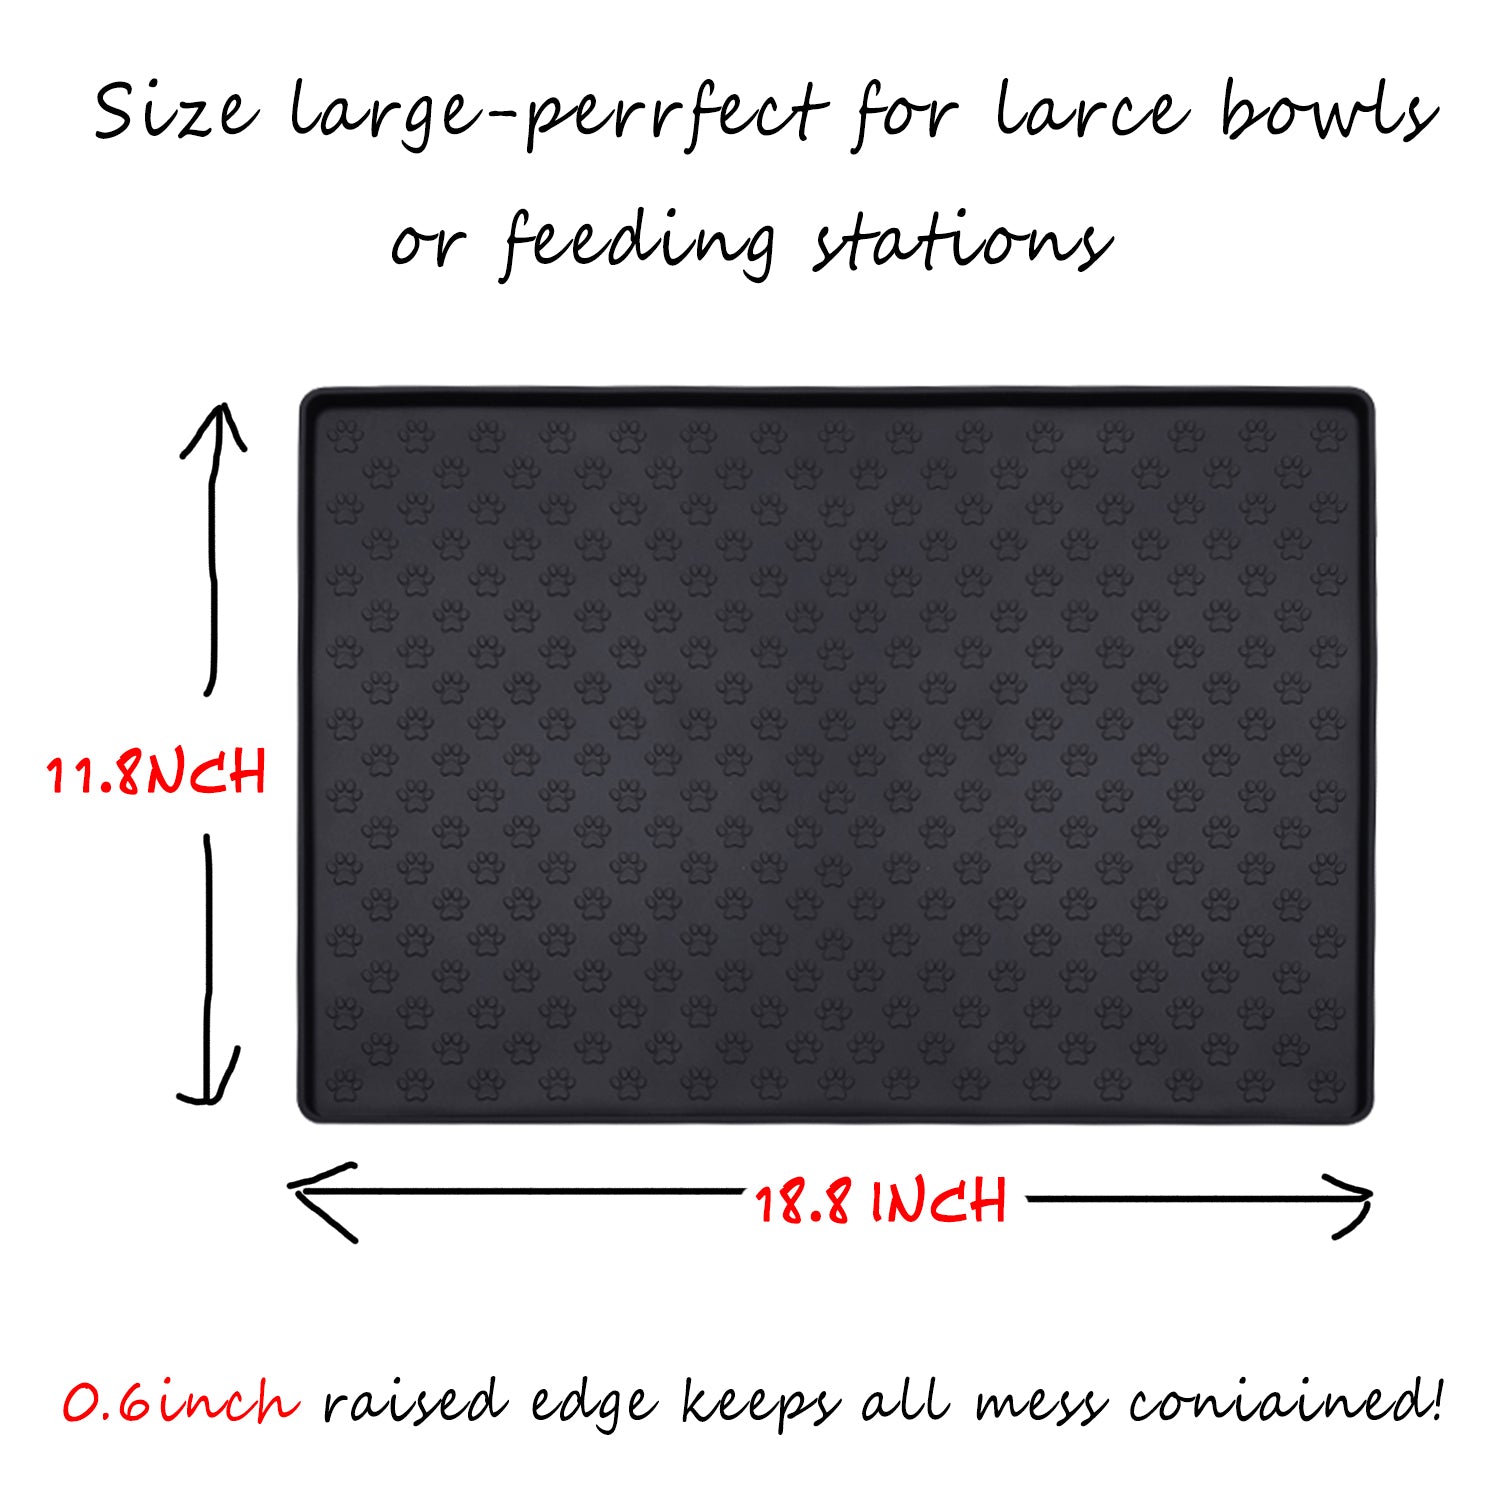 Dog Cat Food Mat Dog Feeding Mat for Food and Water 23.6 *15.7 Silicone  Dog Dish Mats for Floors Waterproof Slip Pet Food Mat with Raised Edges to